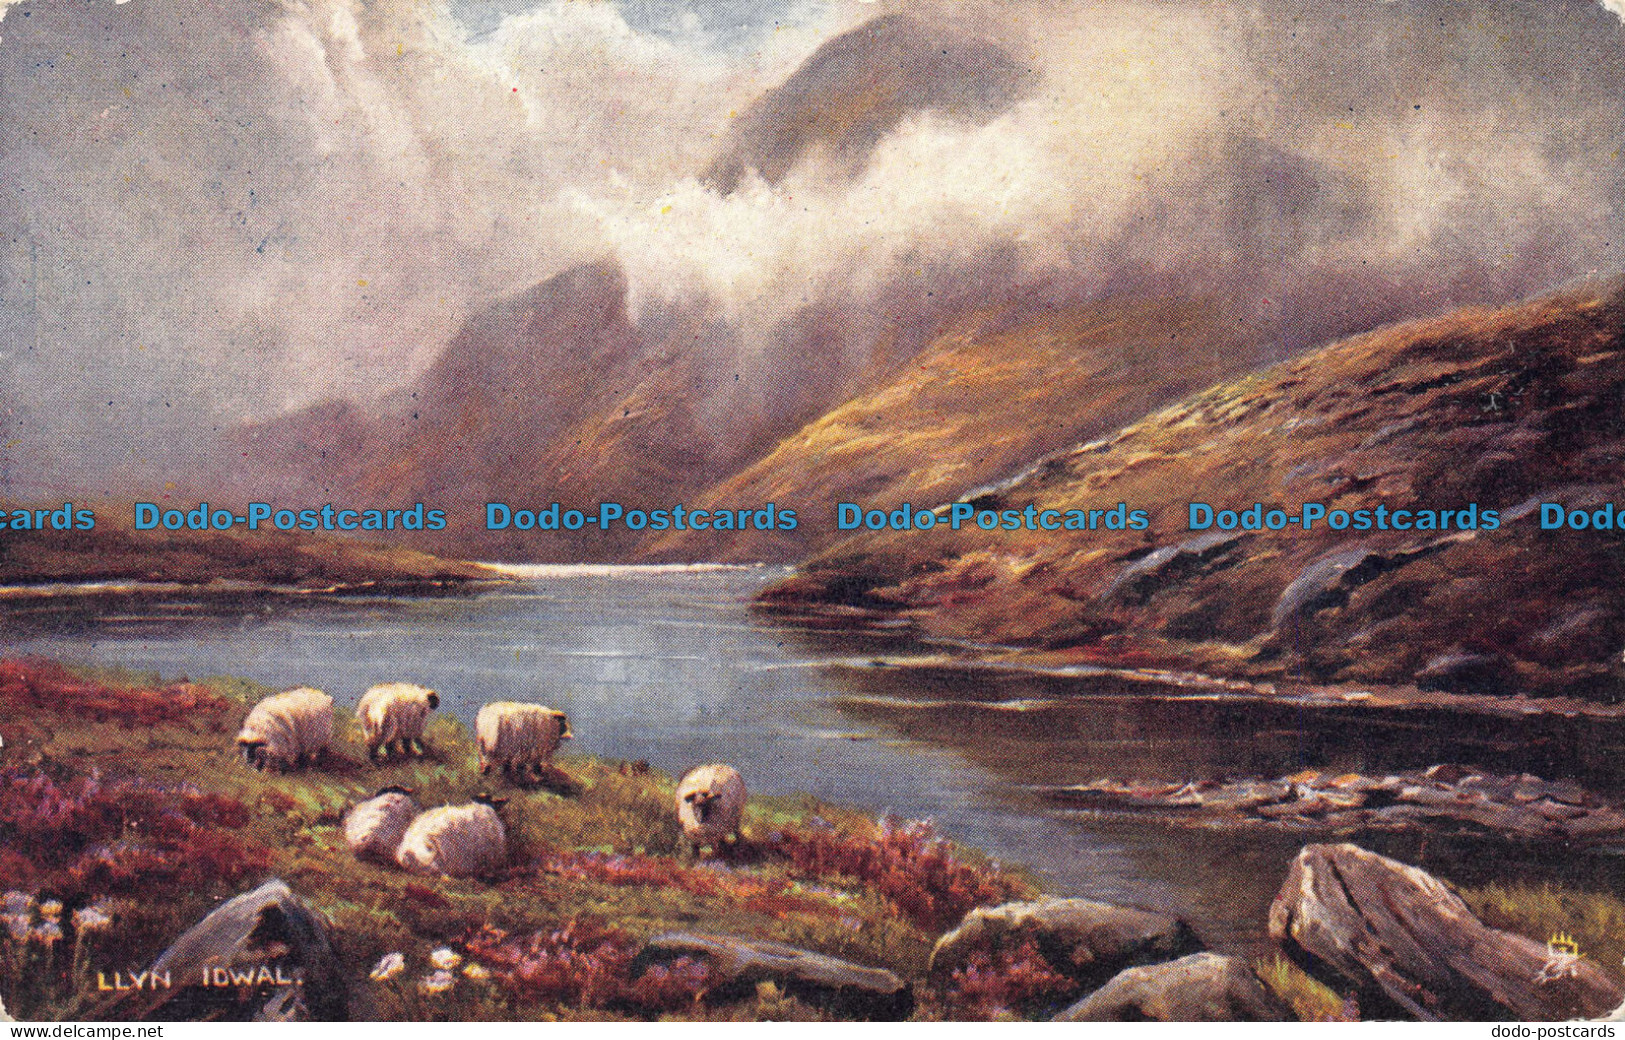 R075288 Llyn Idwal. Picturesque North Wales Series I. Oilette. 1722. Tuck - World